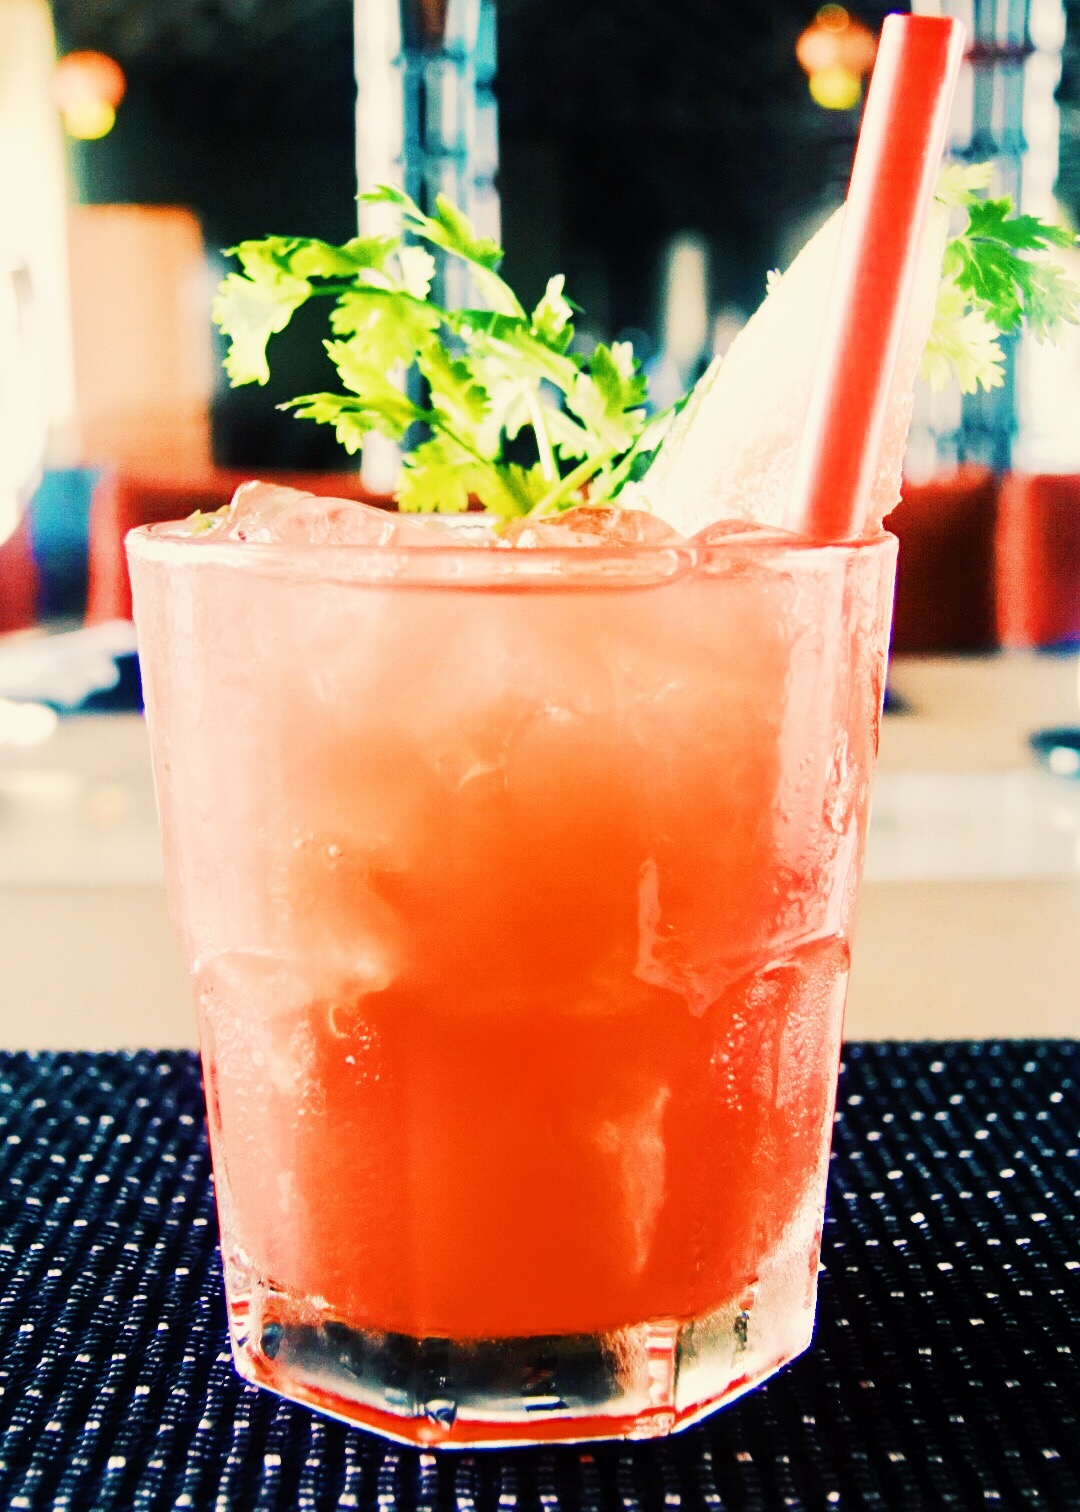 Our refreshing watermelon and coriander cooler